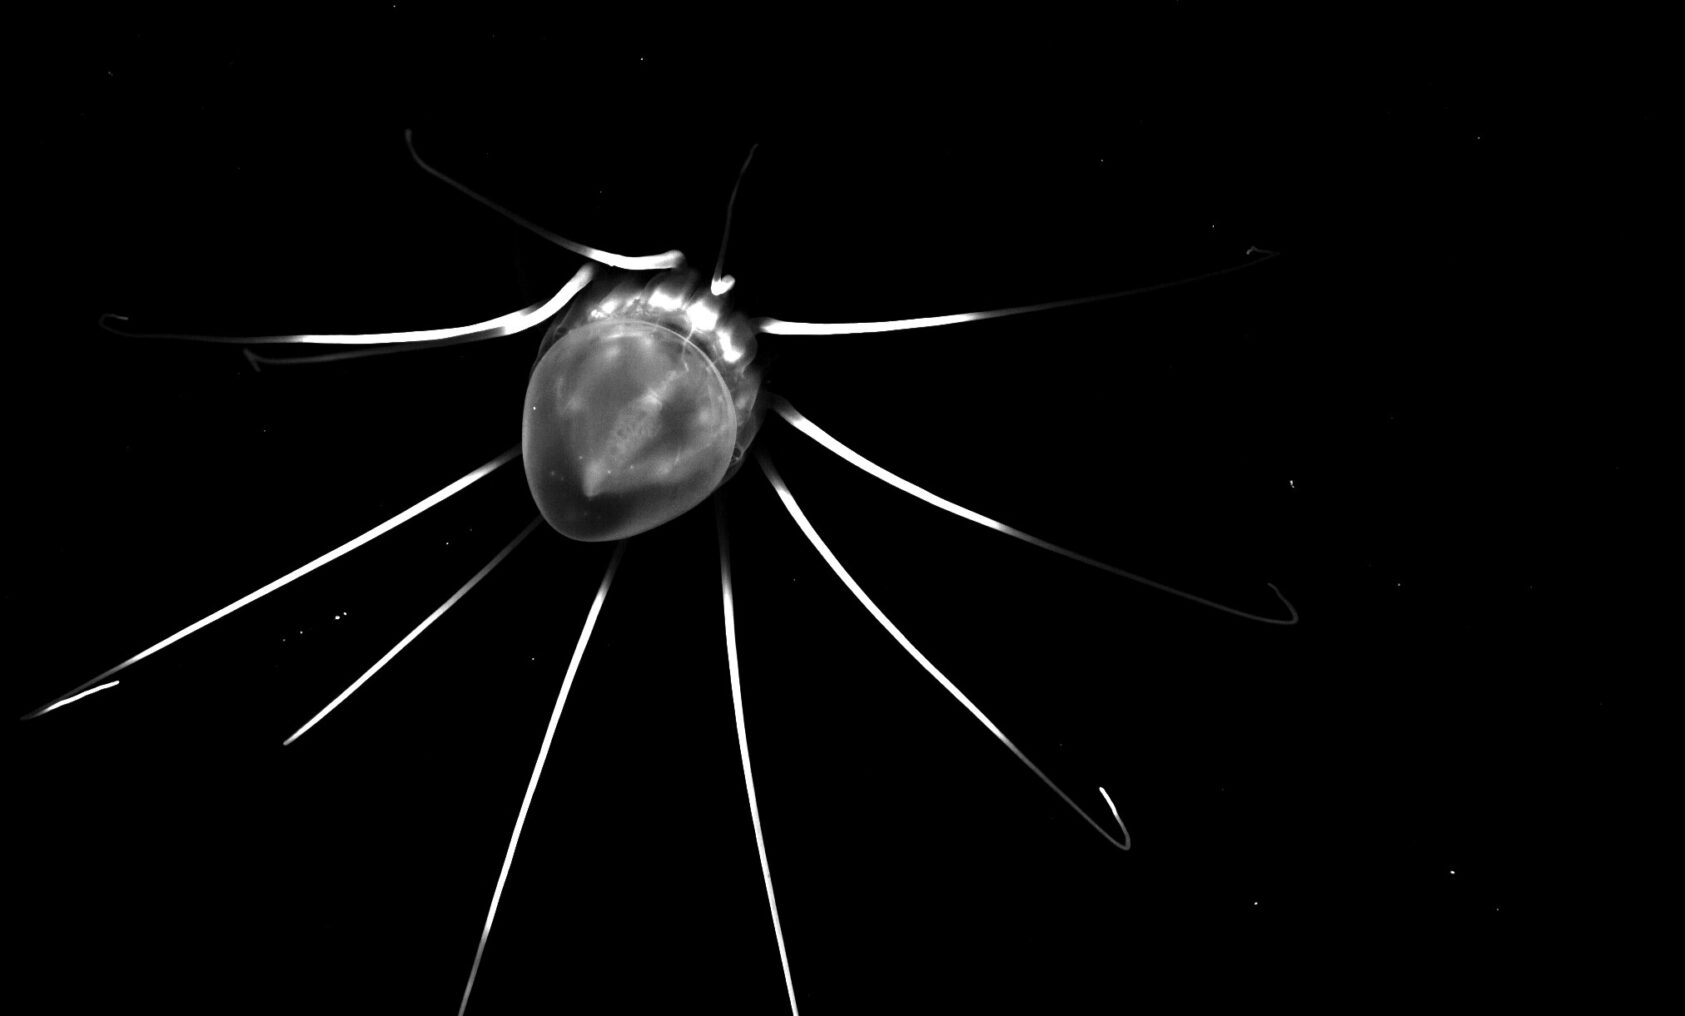 Helena Hauss, NORCE, The helmet jellyfish (Periphylla periphylla) recorded at depth in the Lurefjord Norway, taken with the underwater vision profiler 5 (UVP5)., 3 P periphylla UVP5 credit Helena Hauss, , 